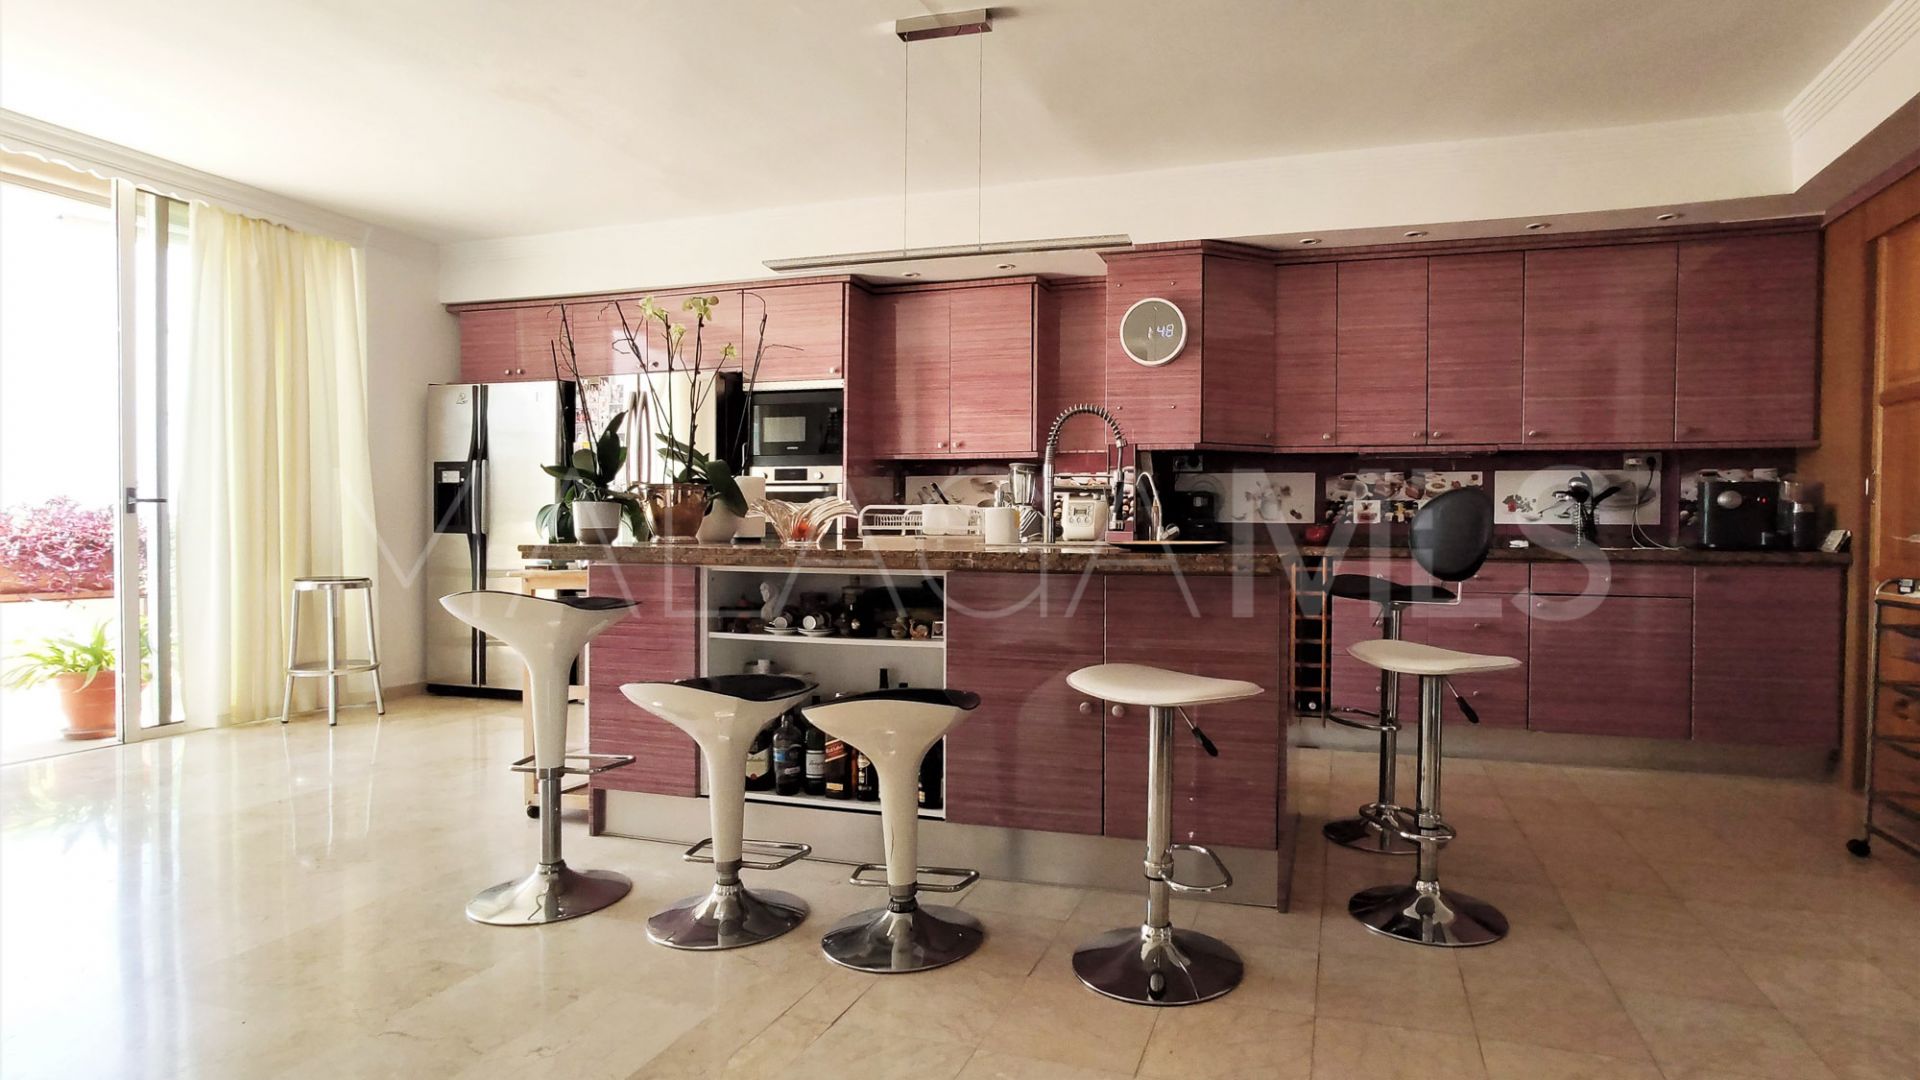 For sale Jardines de Andalucia apartment with 3 bedrooms